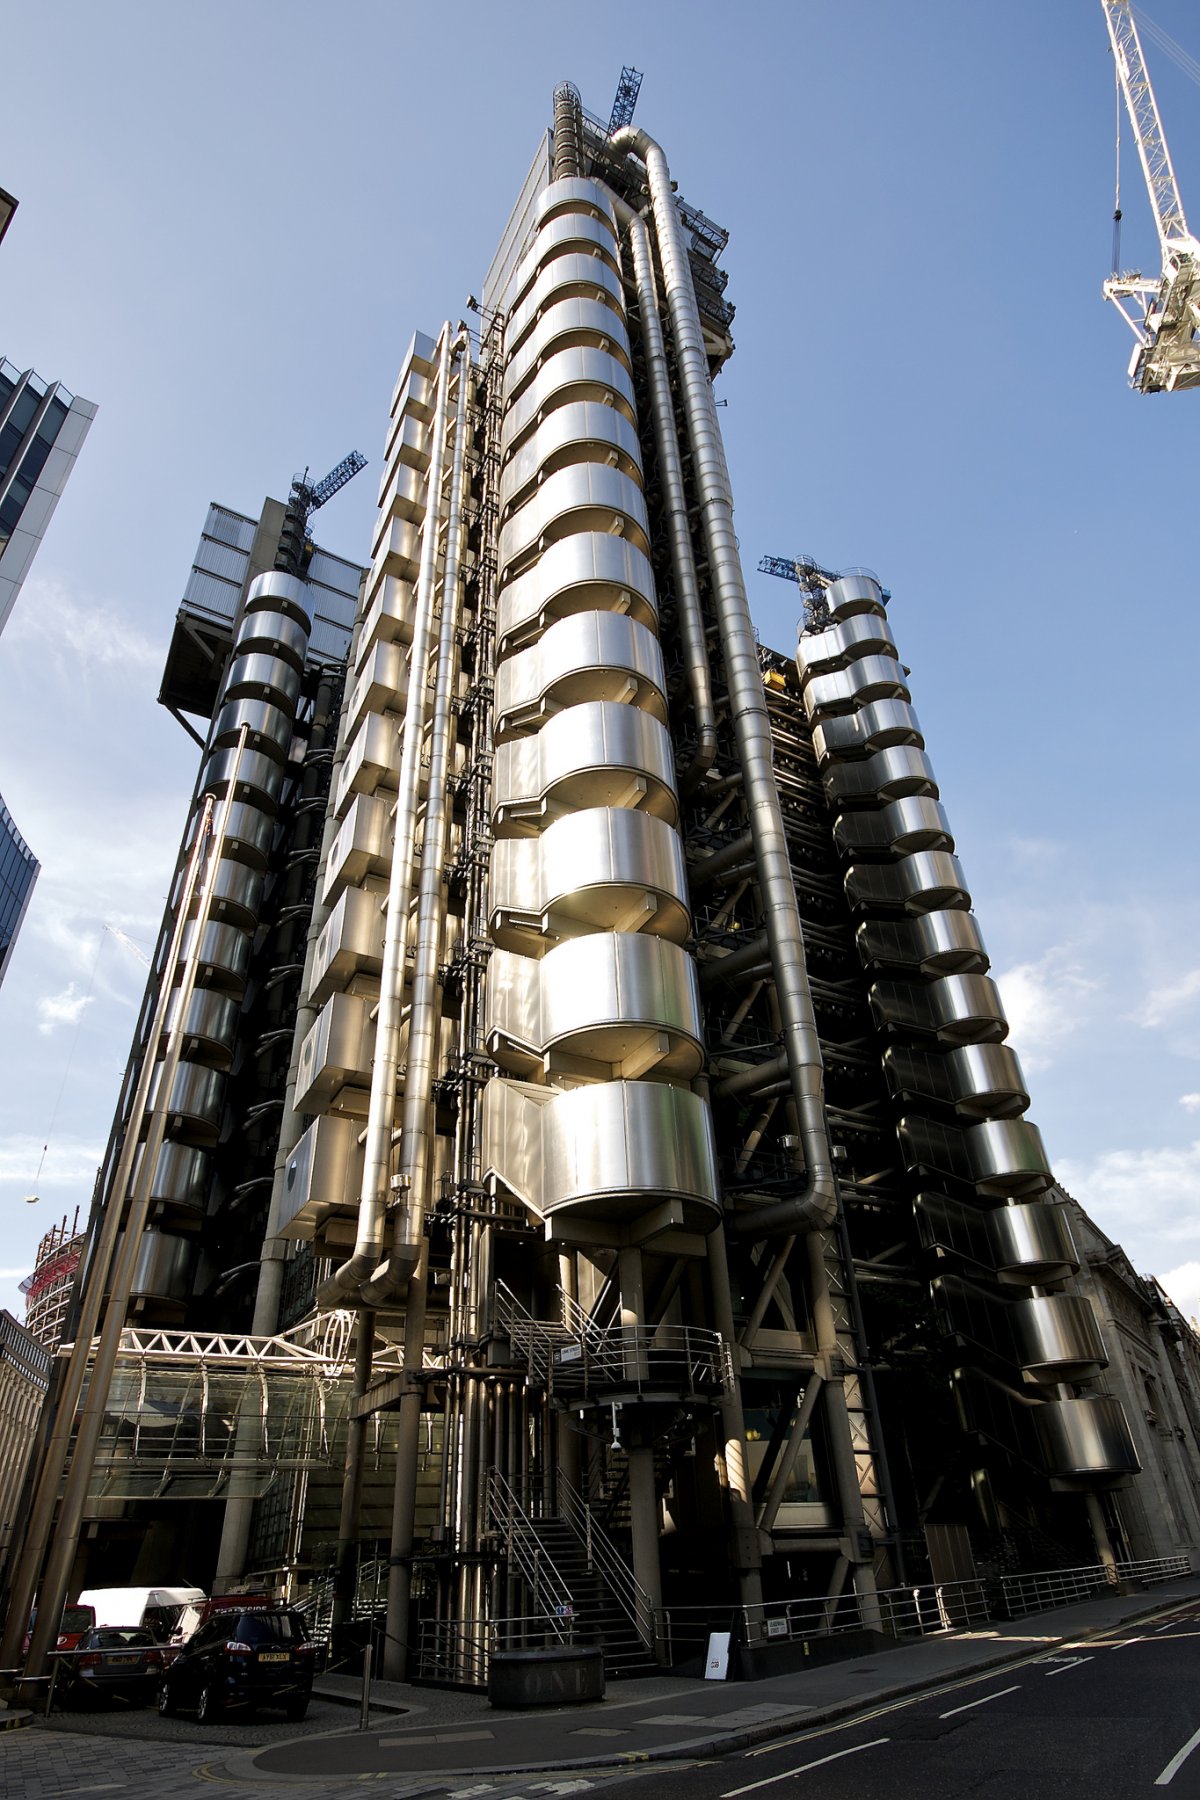 The Lloyd’s Building in London.